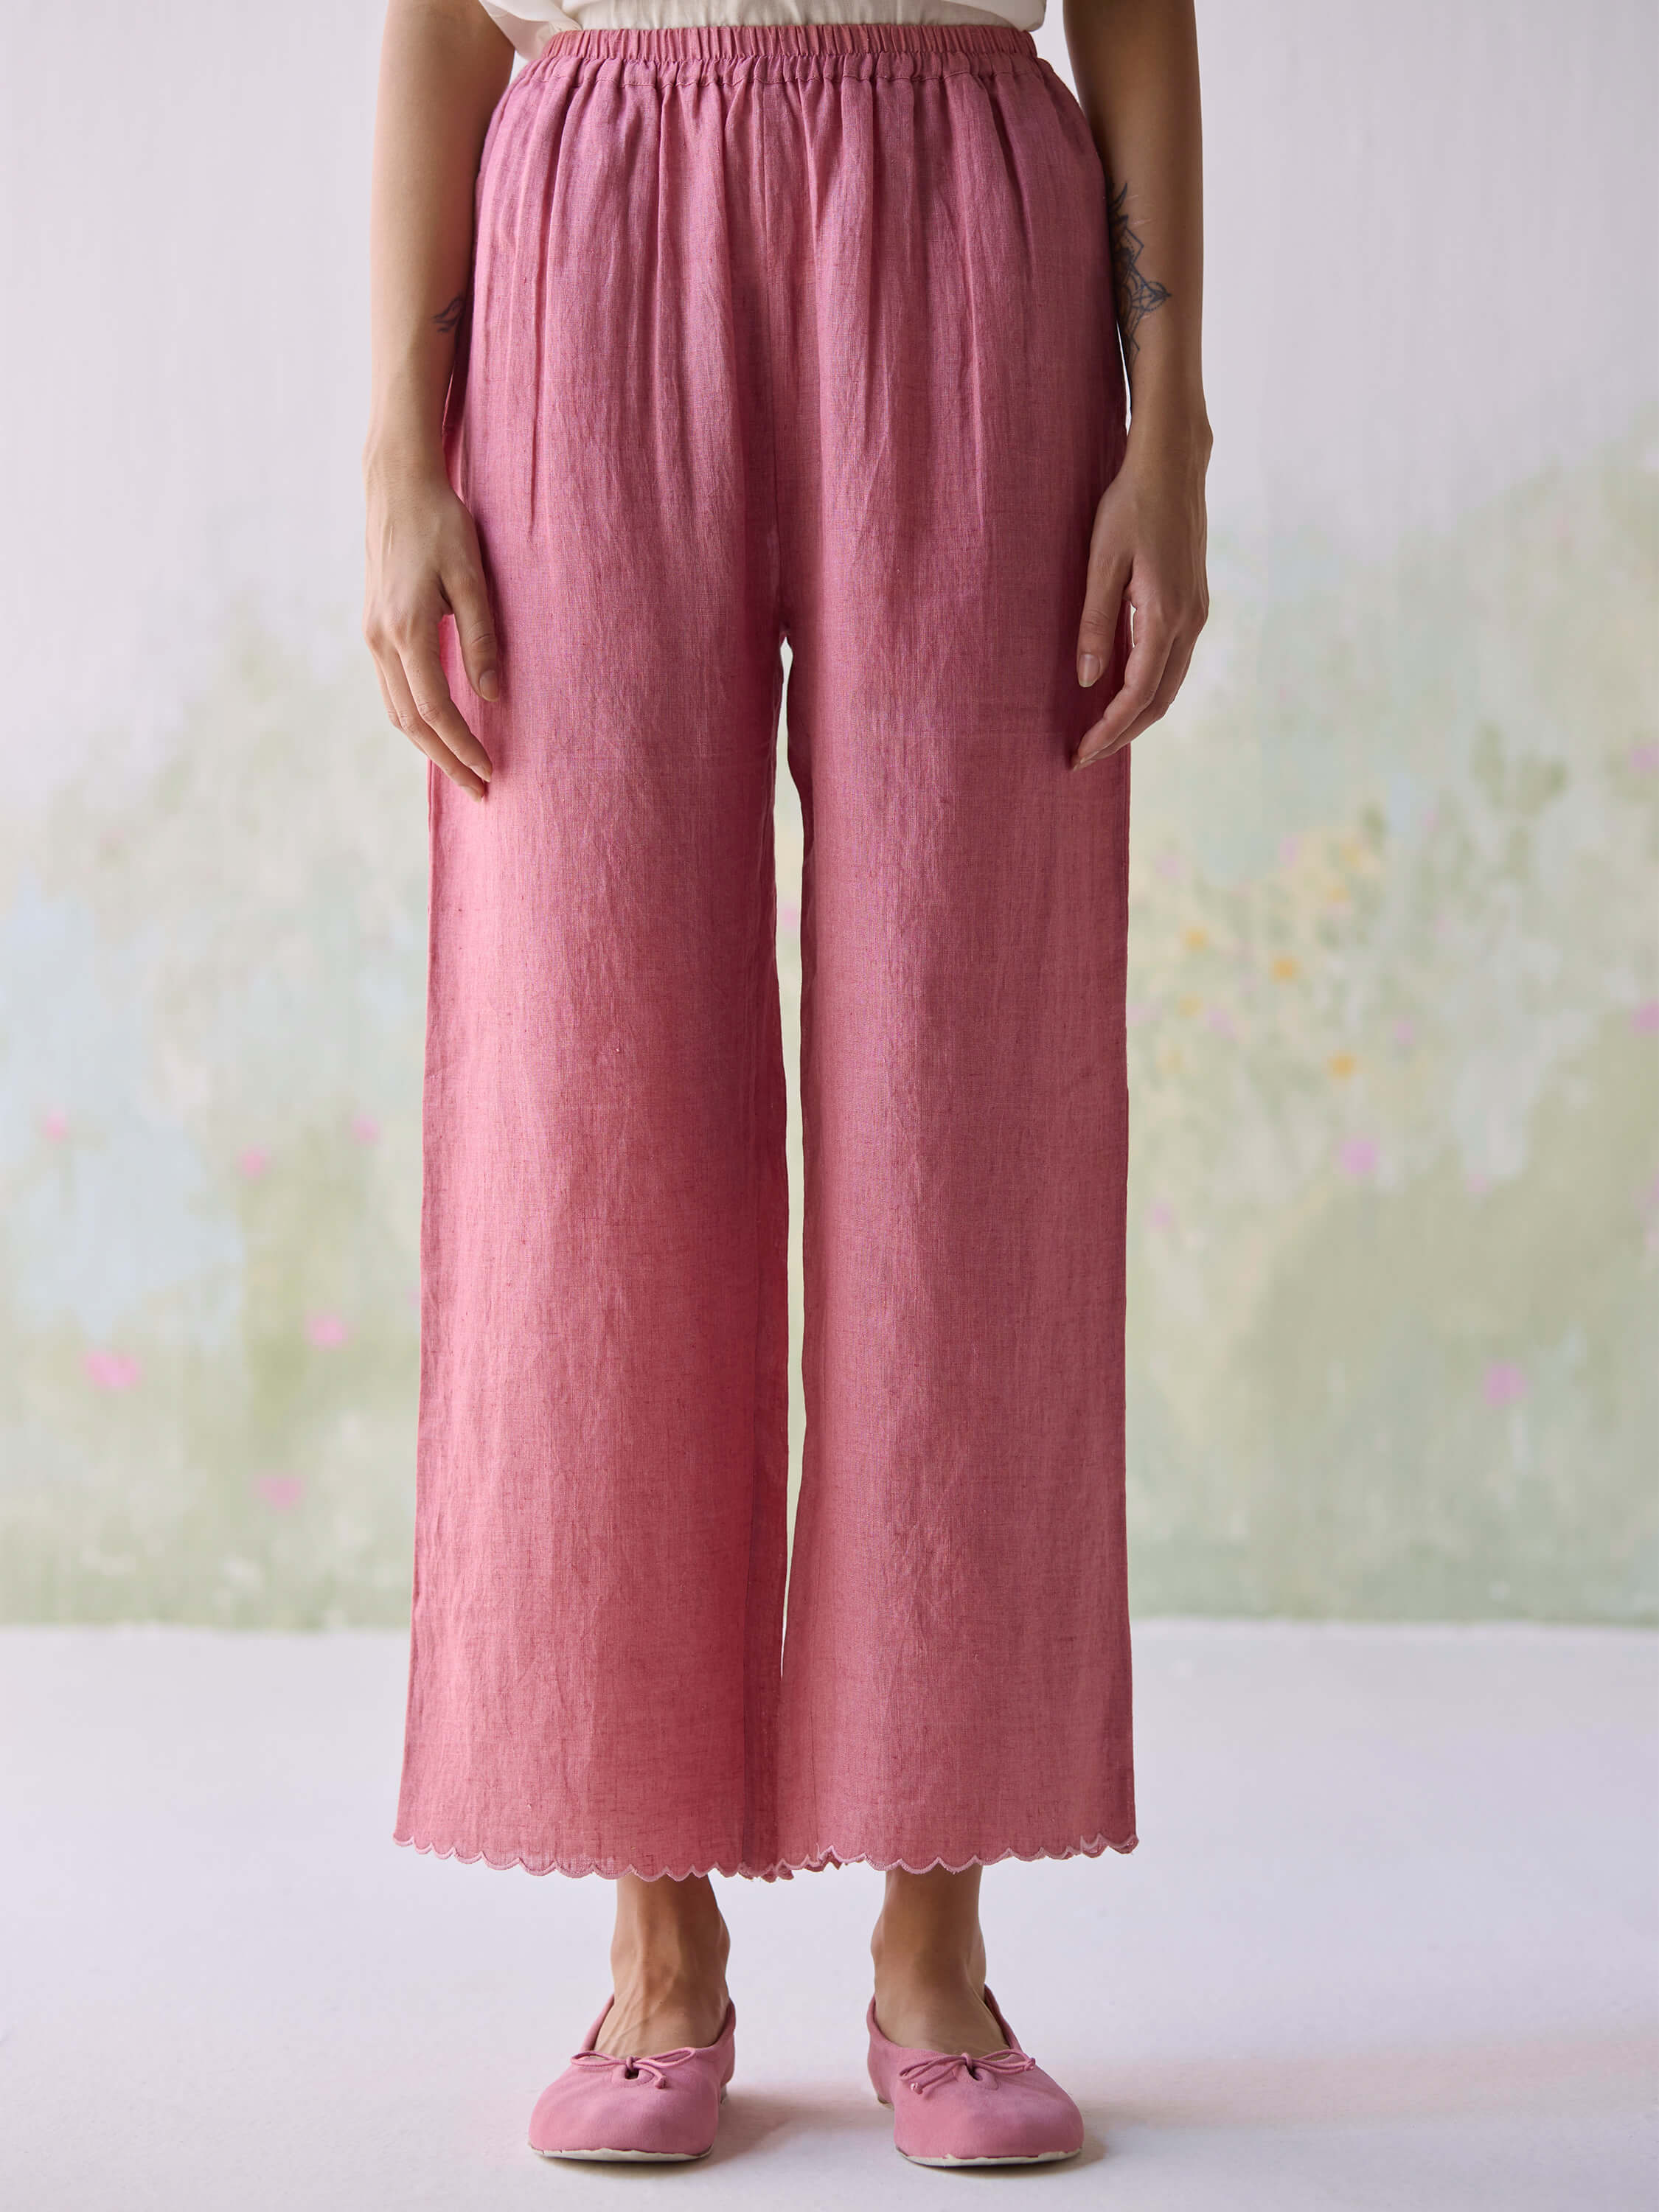 Woman wearing pink wide-leg pants and matching shoes.